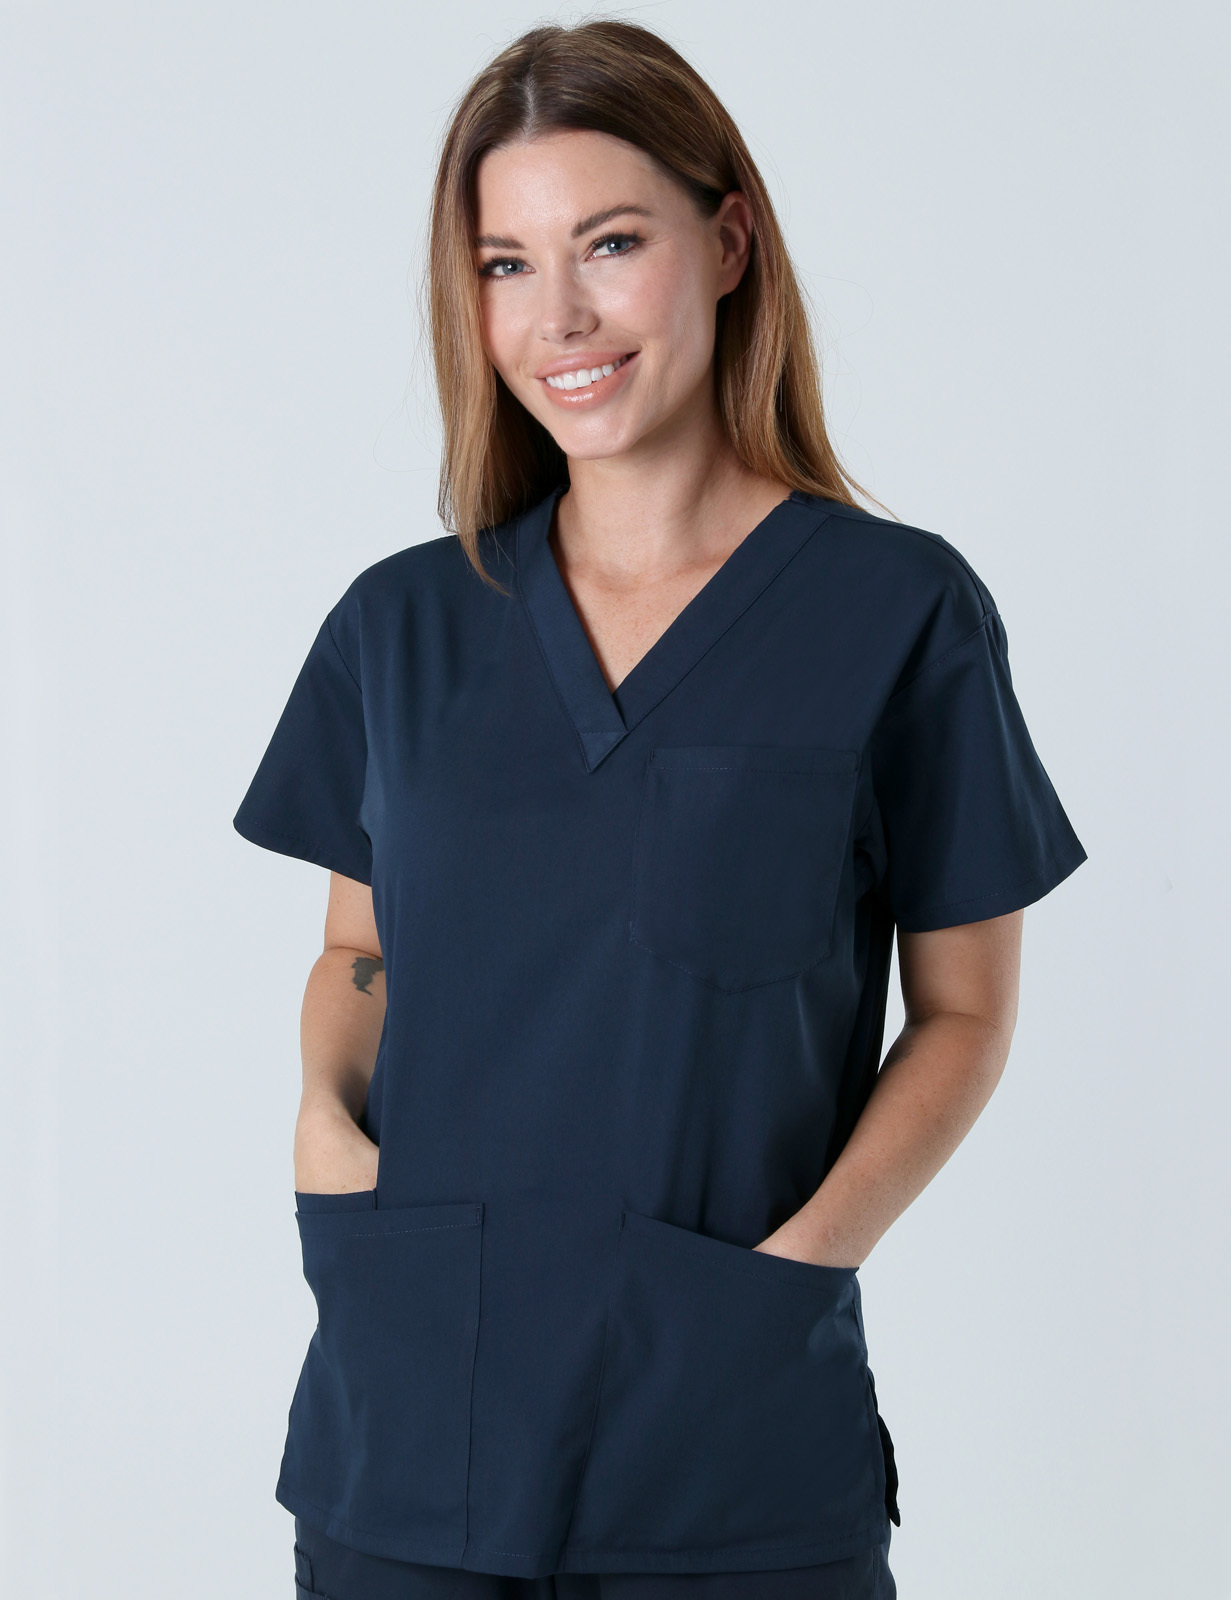 Frankston - AAAU/CNS (4 Pocket Scrub Top and Cargo Pants in Navy incl Logos)